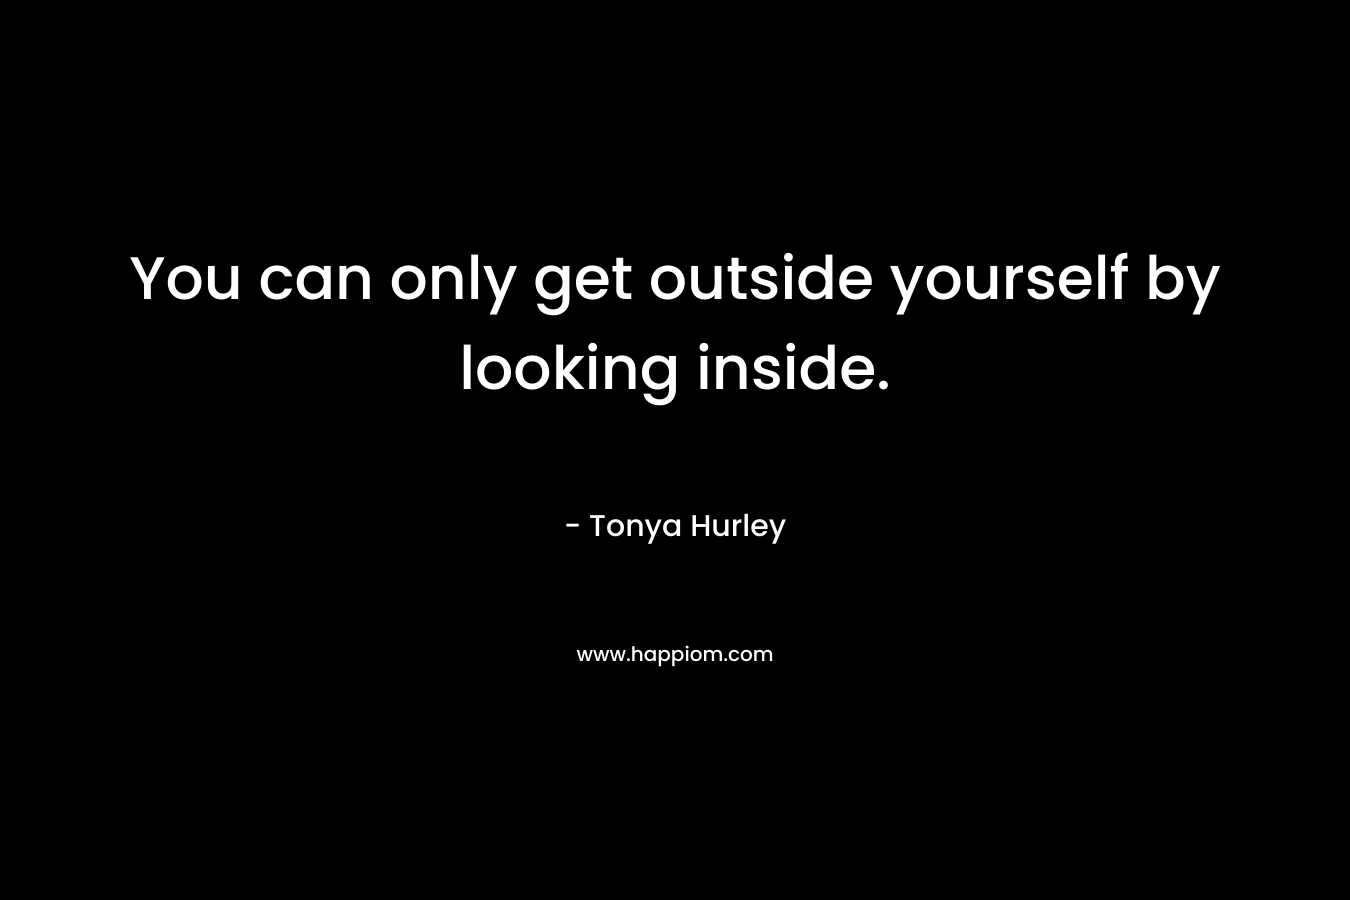 You can only get outside yourself by looking inside.